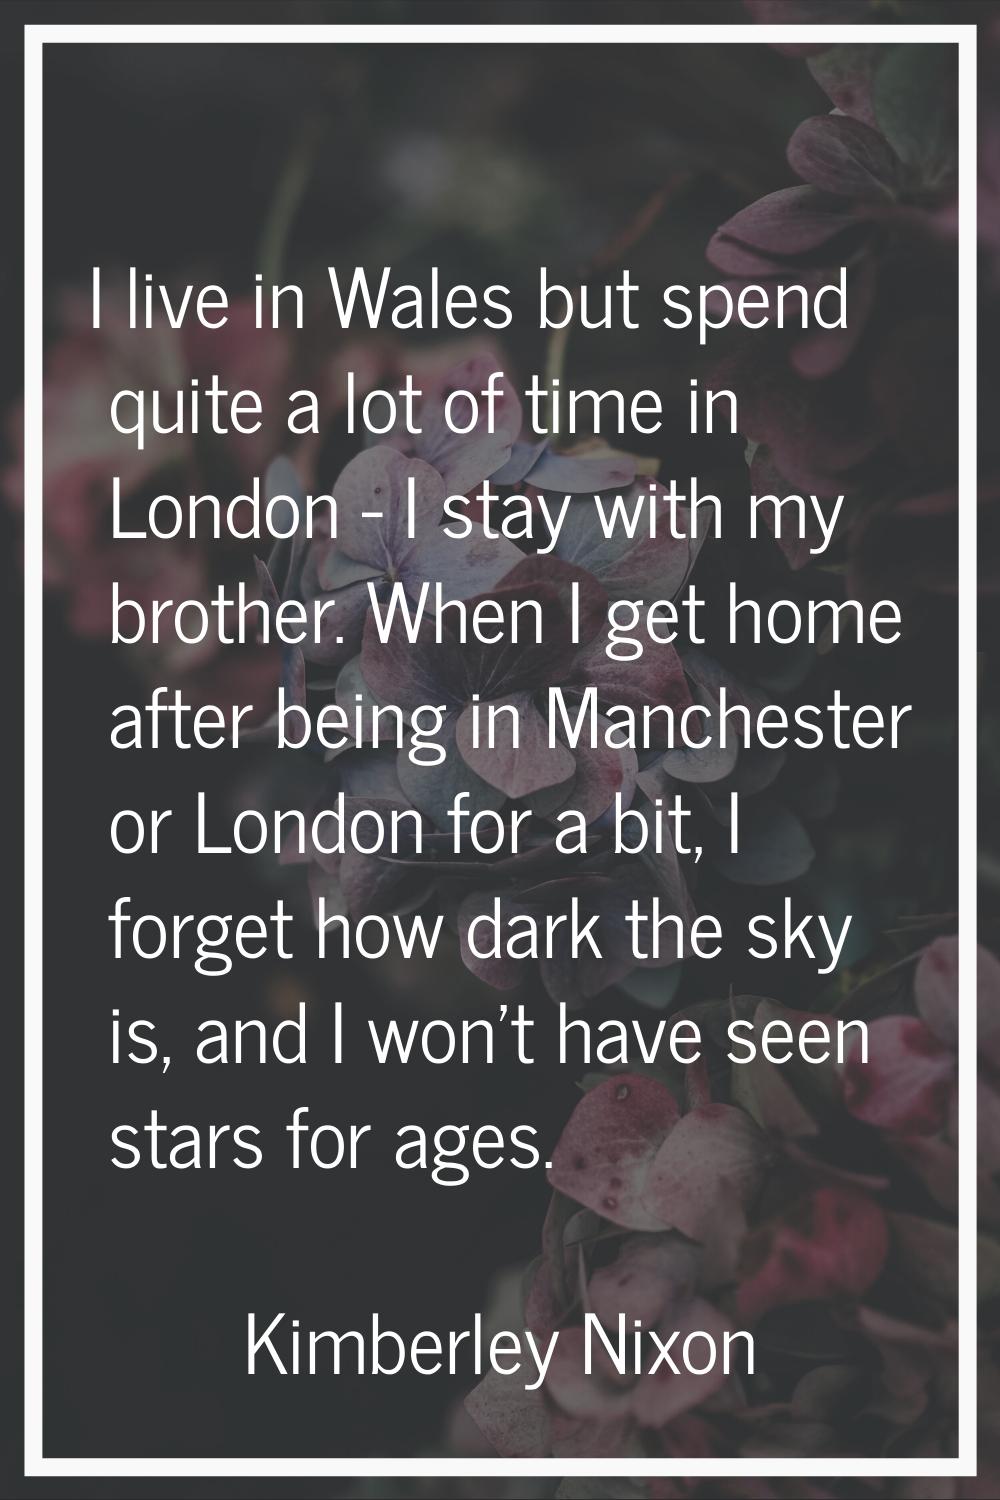 I live in Wales but spend quite a lot of time in London - I stay with my brother. When I get home a